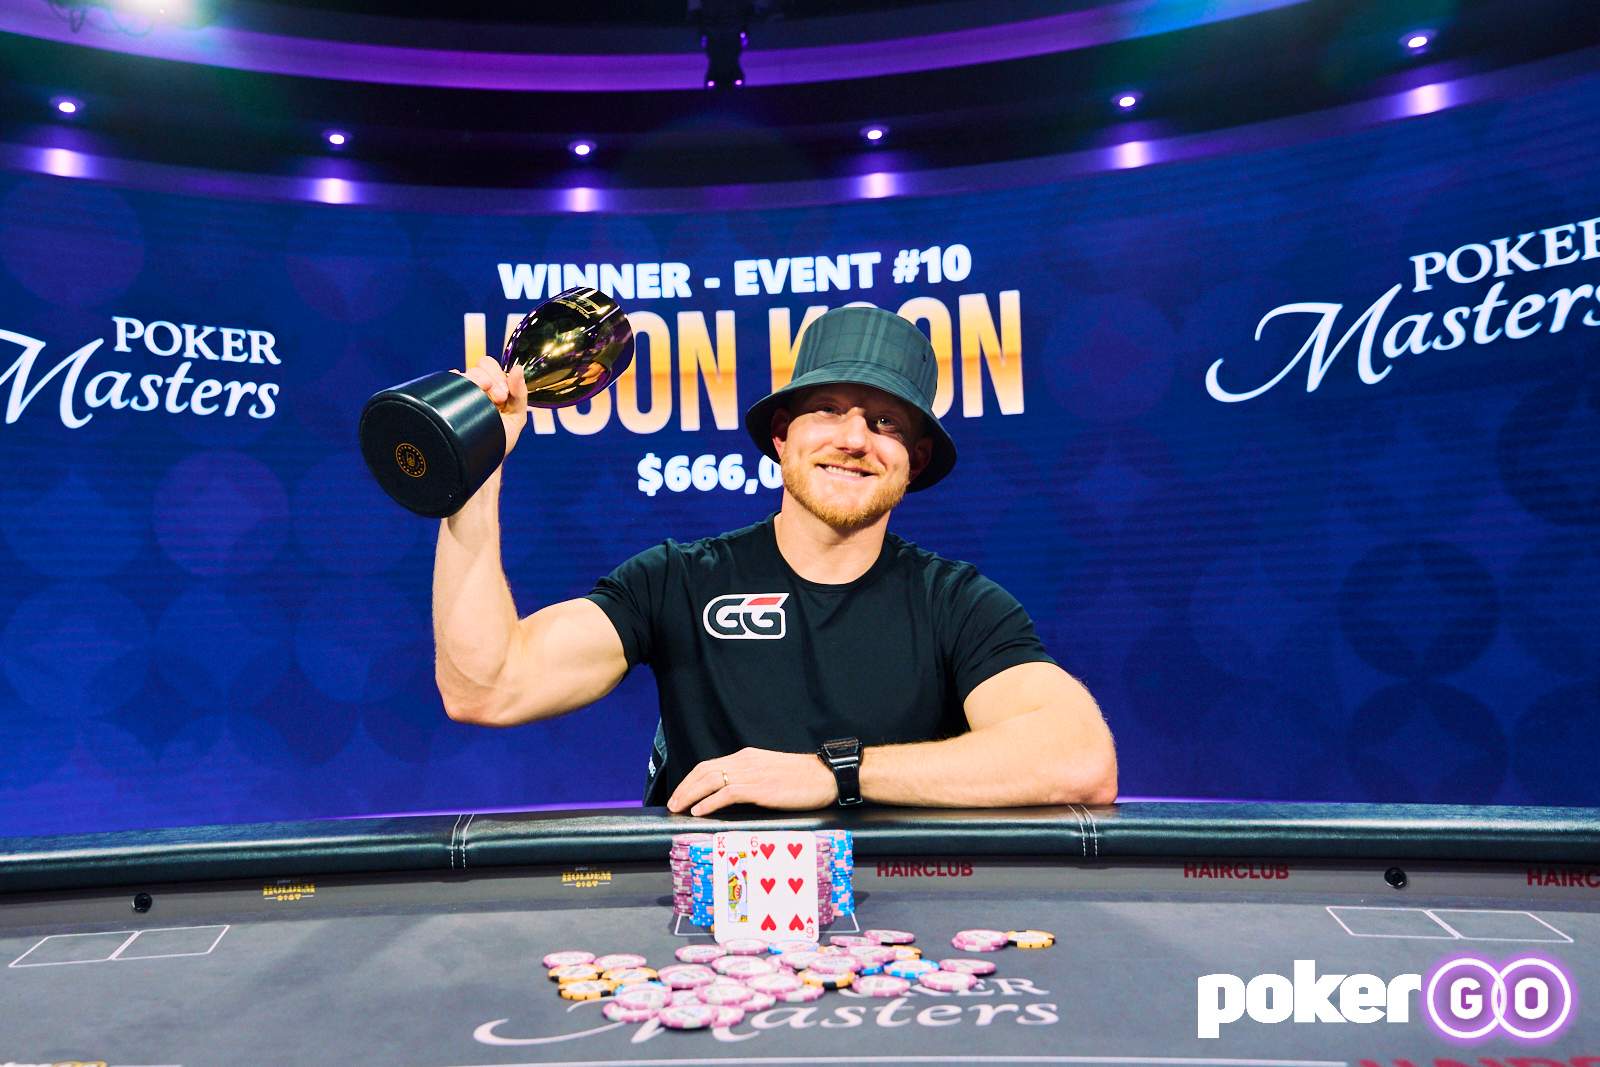 Jason Koon Wins Final Event of 2022 Poker Masters for $666,000